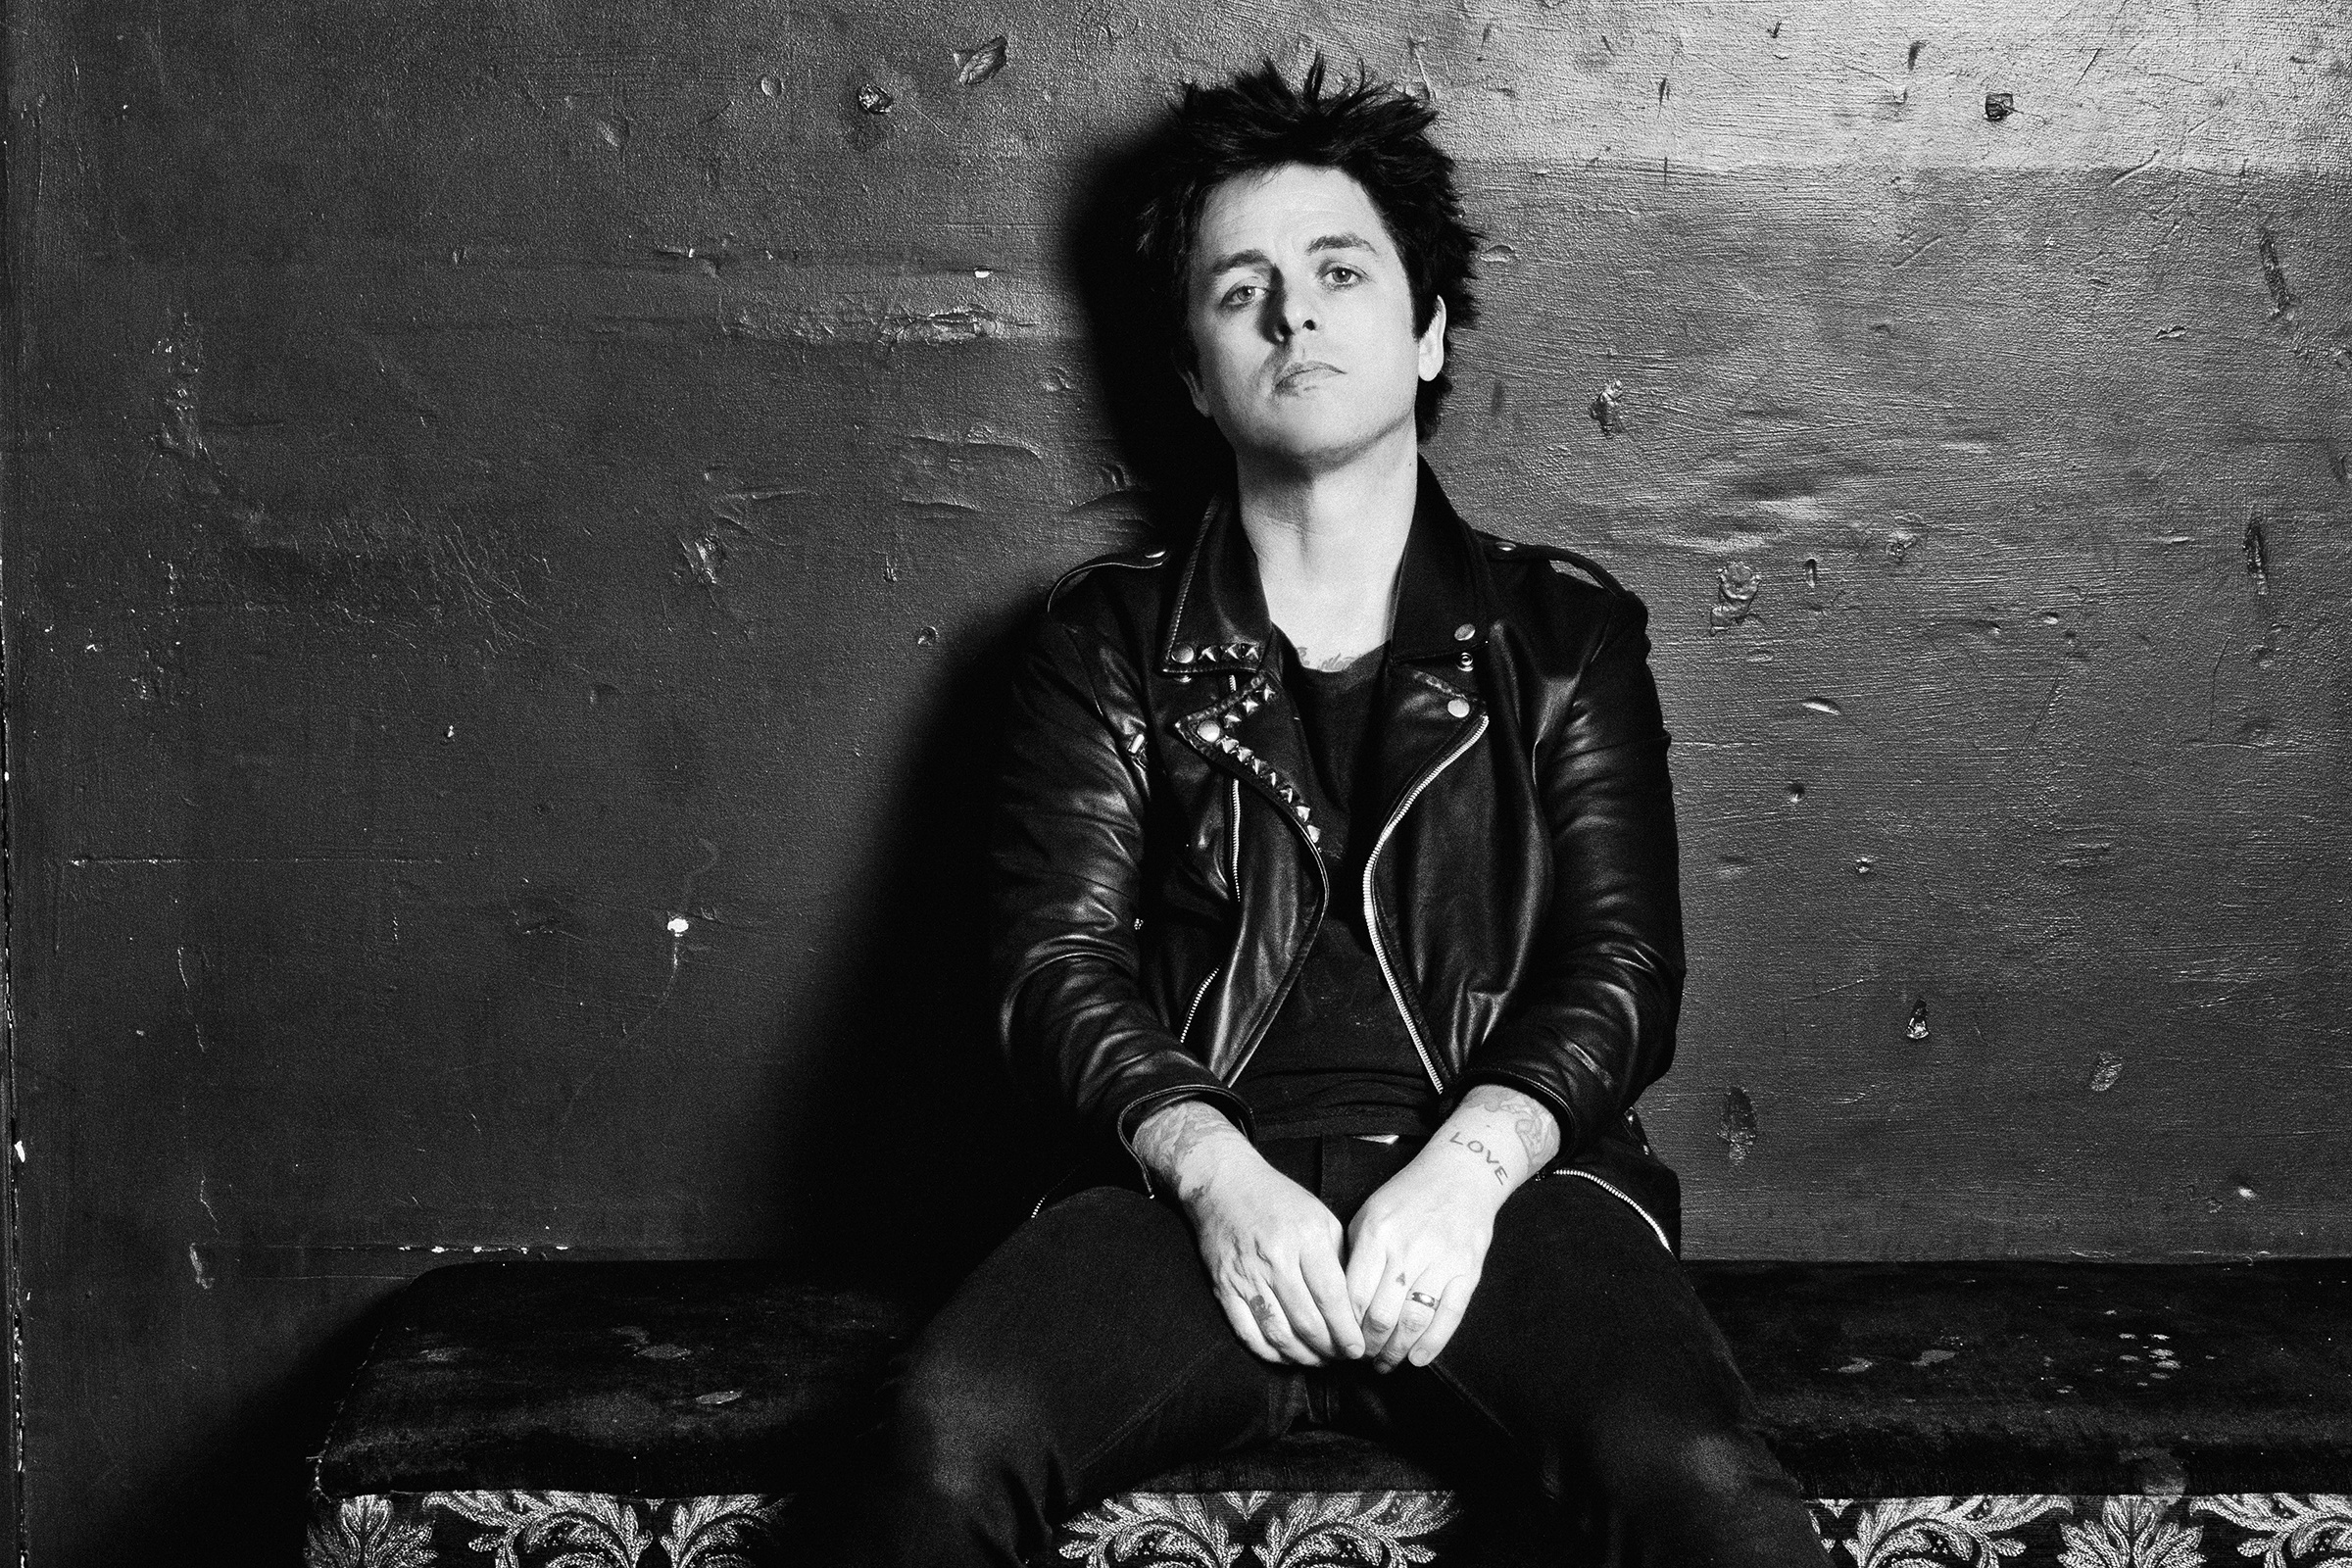 Billie Joe Armstrong, Music journey, 15 iconic songs, Rolling Stone feature, 2400x1600 HD Desktop